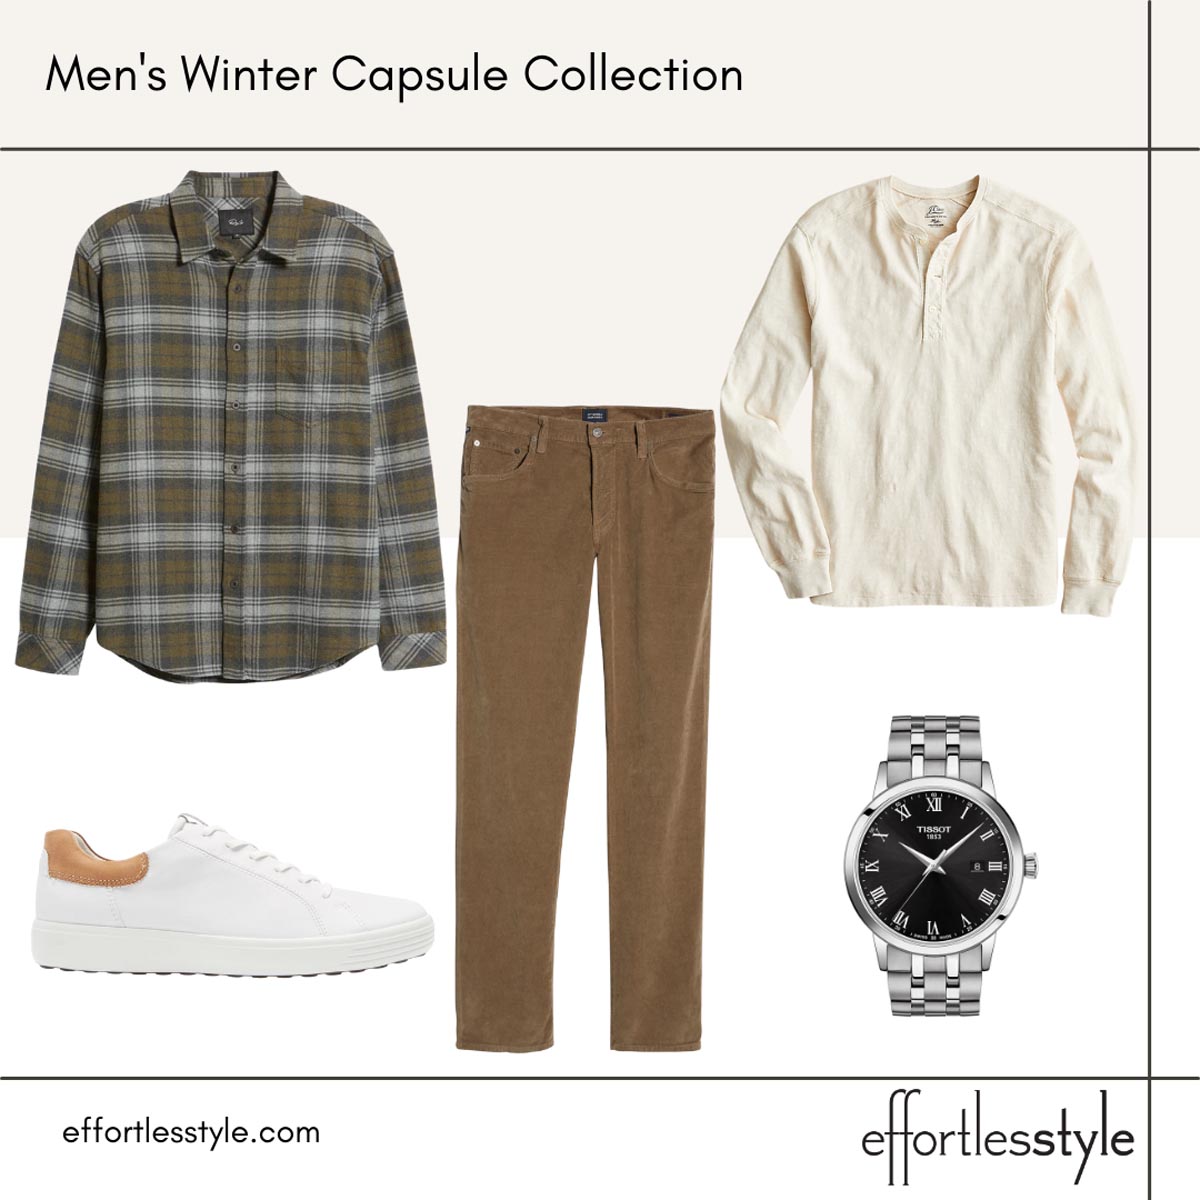 Men's Winter Capsule Collection flannel shirt outfits flannel shirt looks for guys how to wear a flannel shirt men sneakers and cords for men sneakers and corduroy pants